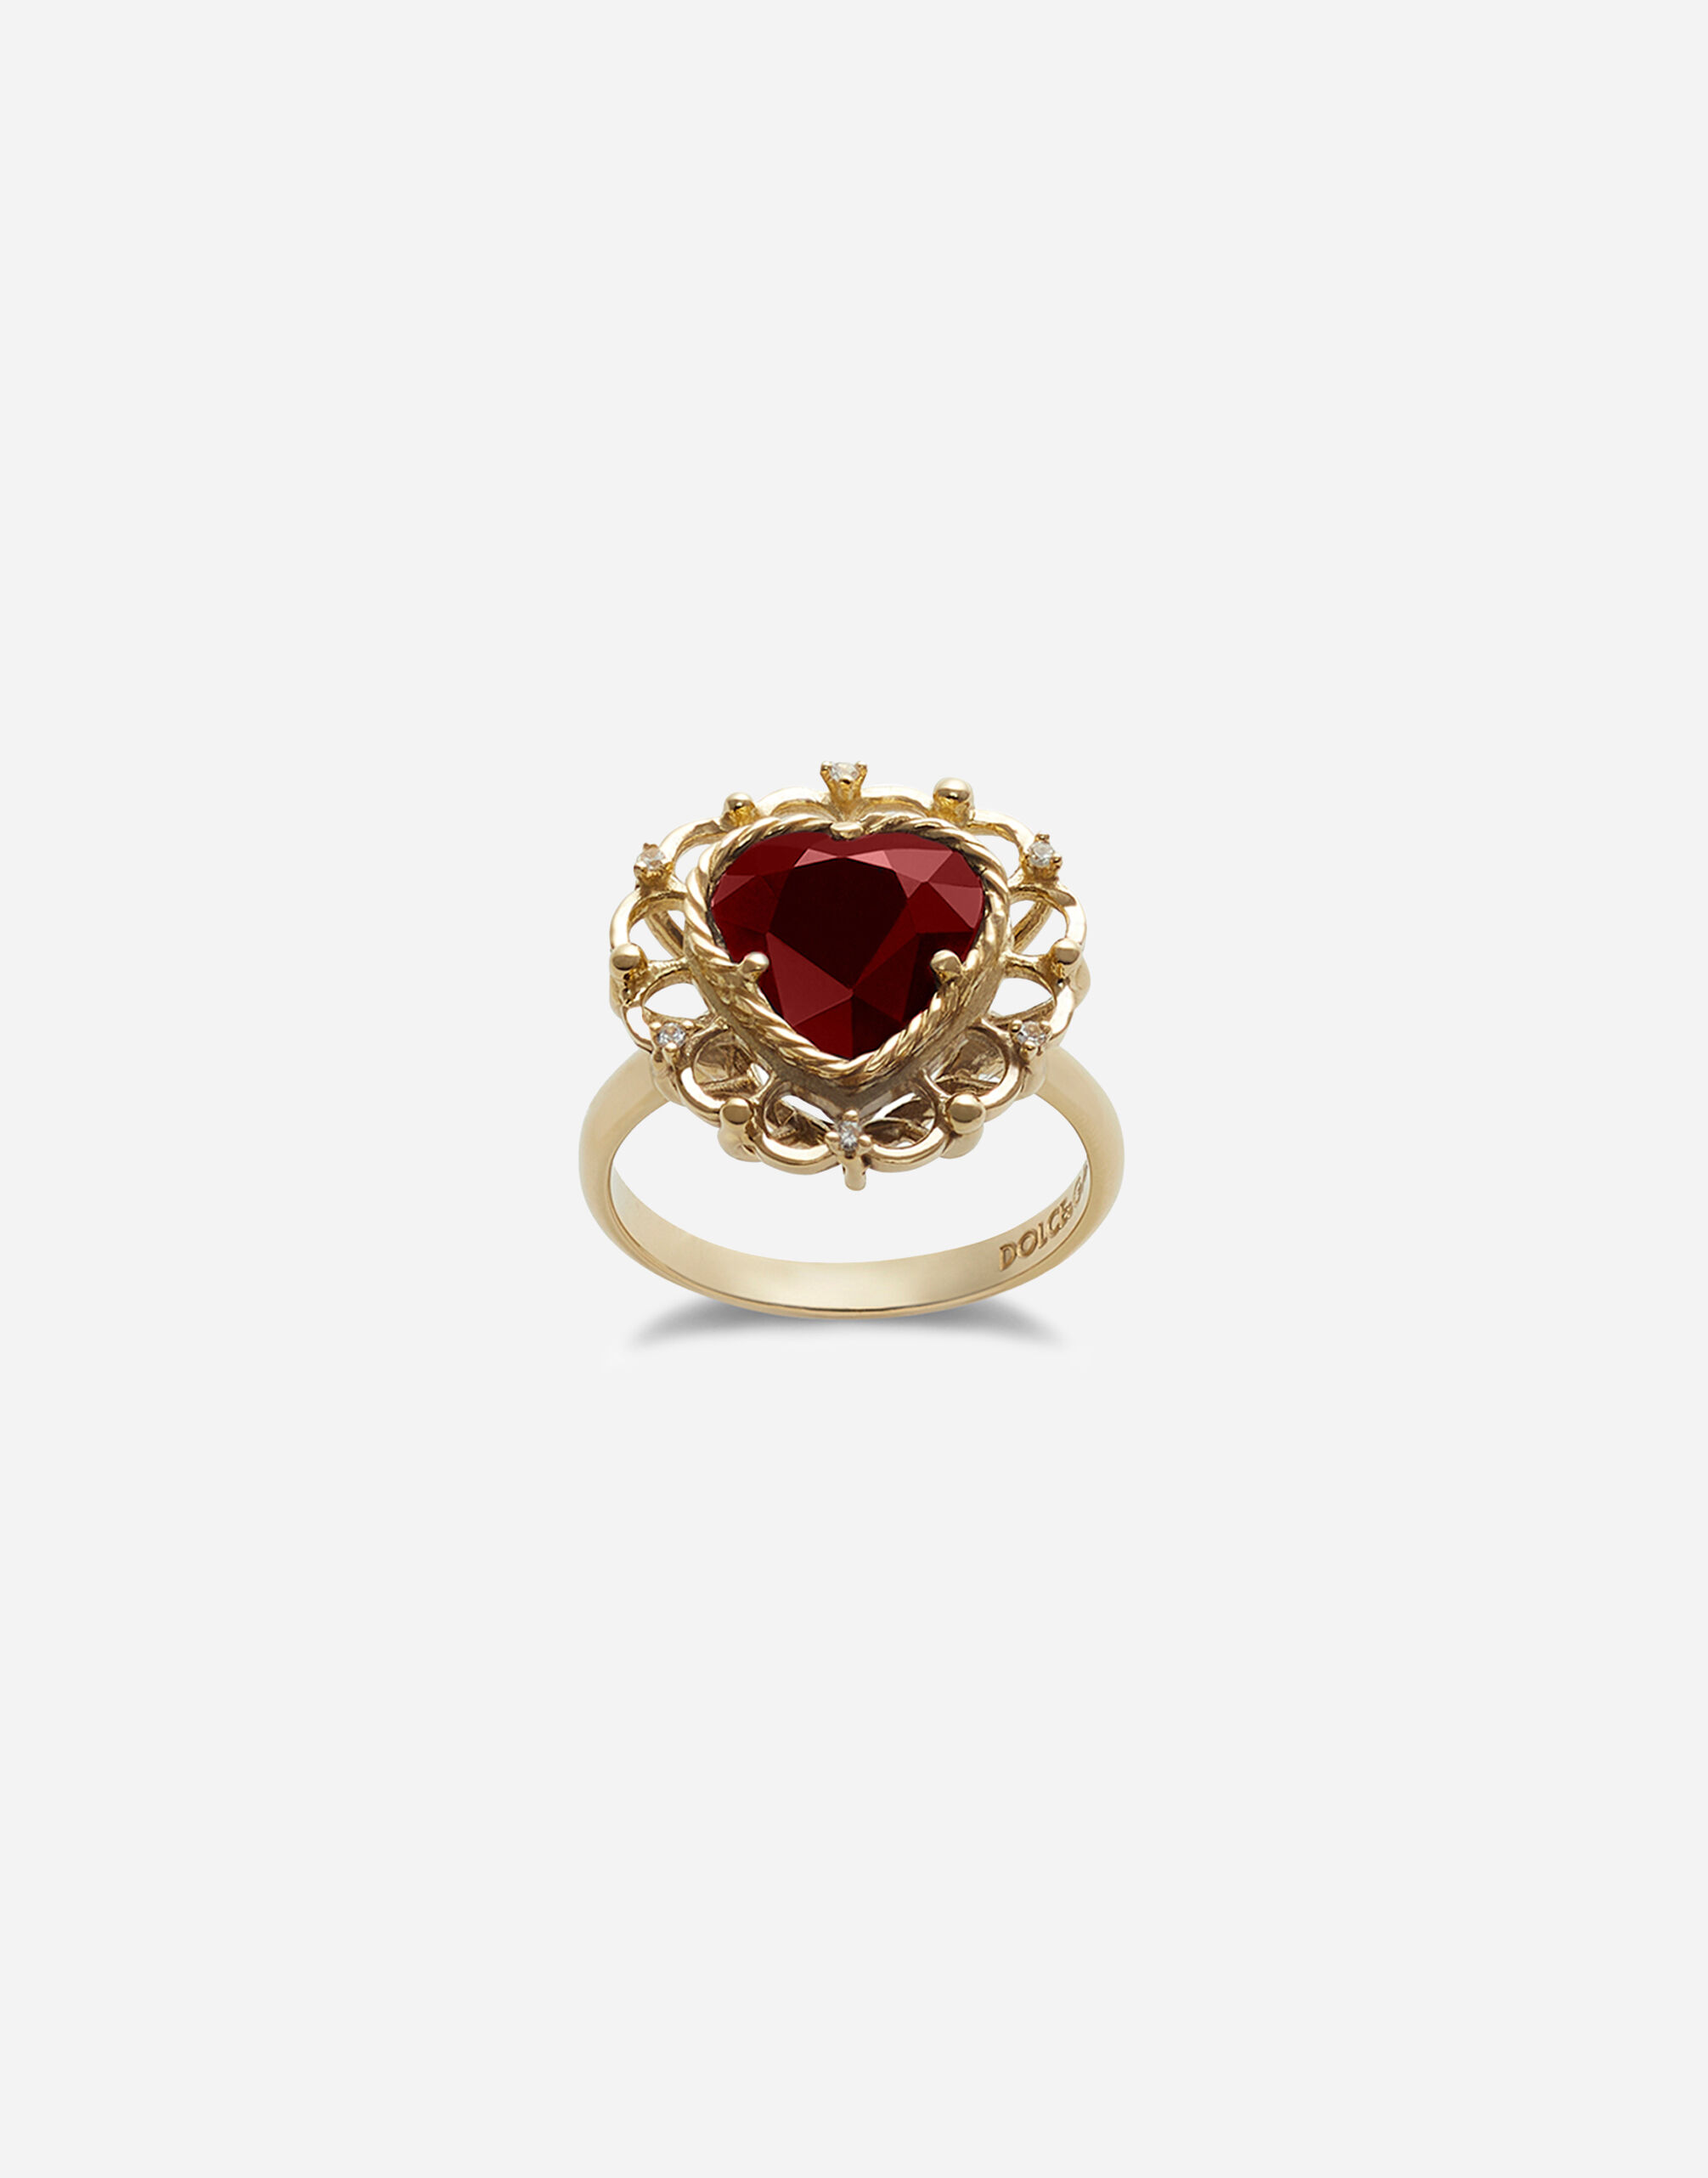 ${brand} Heart ring in yellow gold 18Kt with a red rhodolite garnet. ${colorDescription} ${masterID}